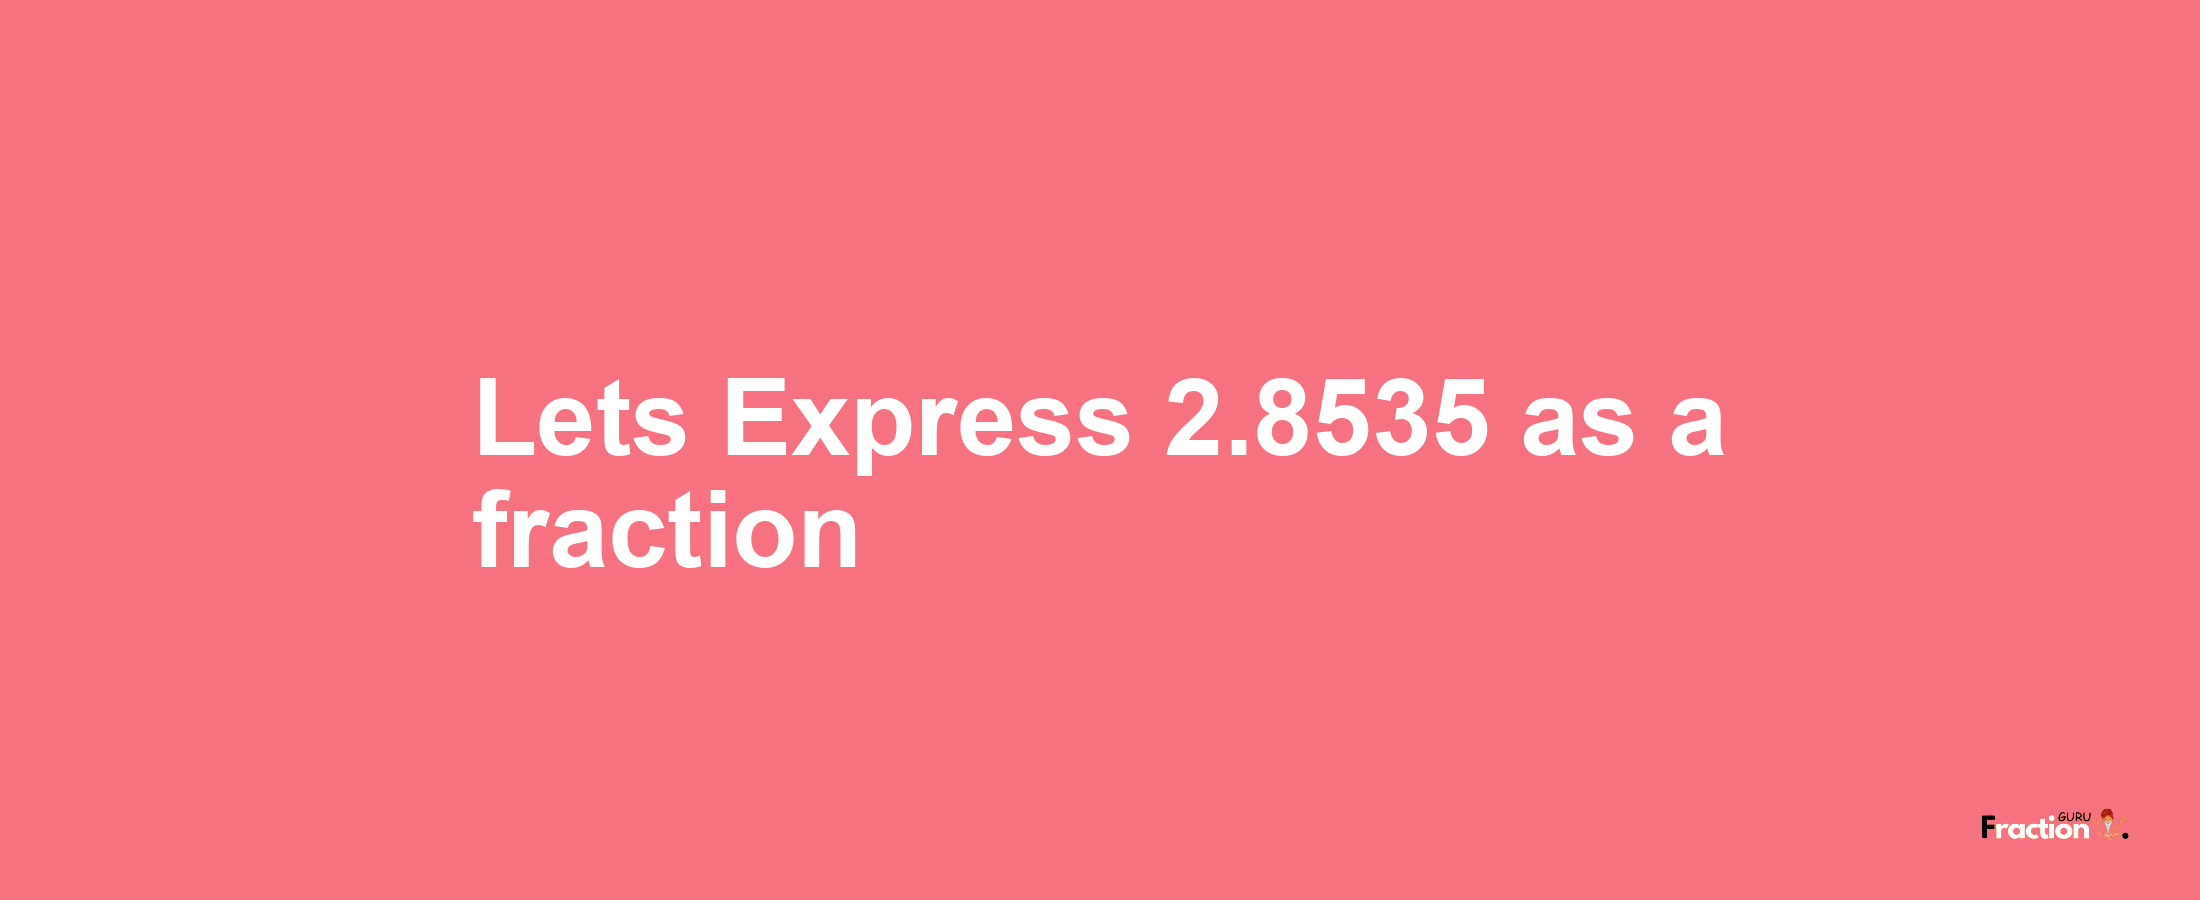 Lets Express 2.8535 as afraction